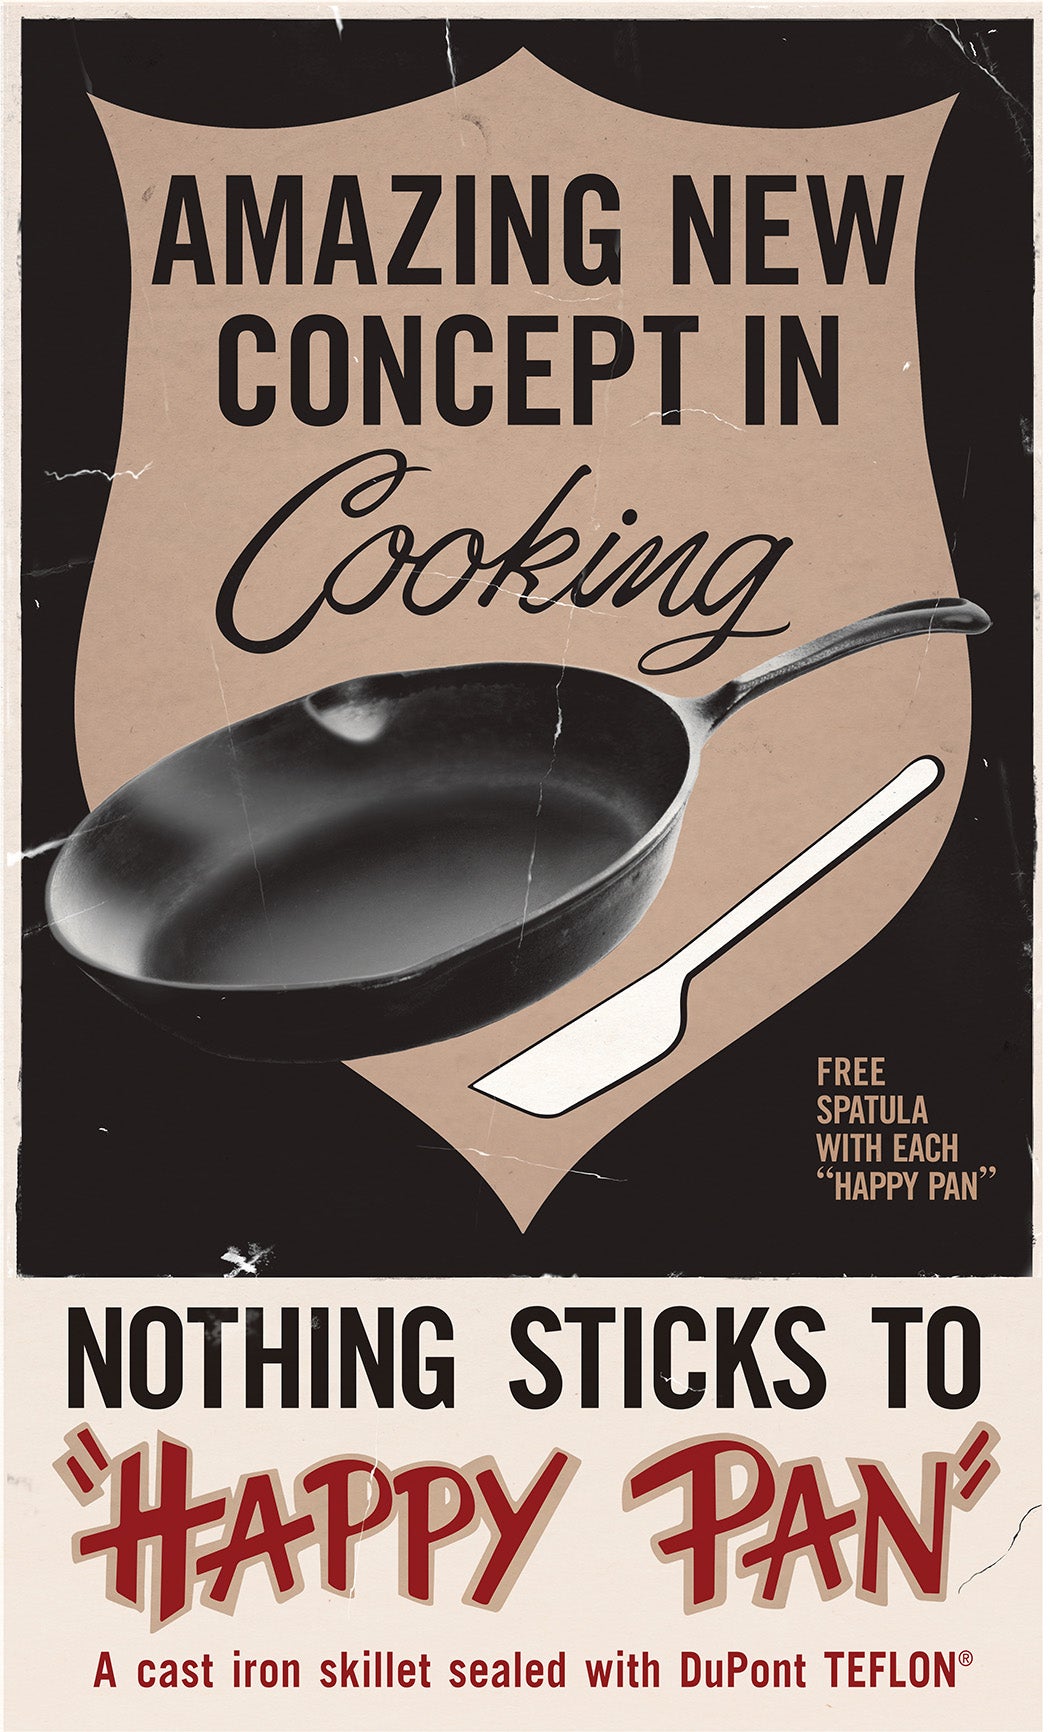 A poster displaying the first sold Teflon coated frying pan